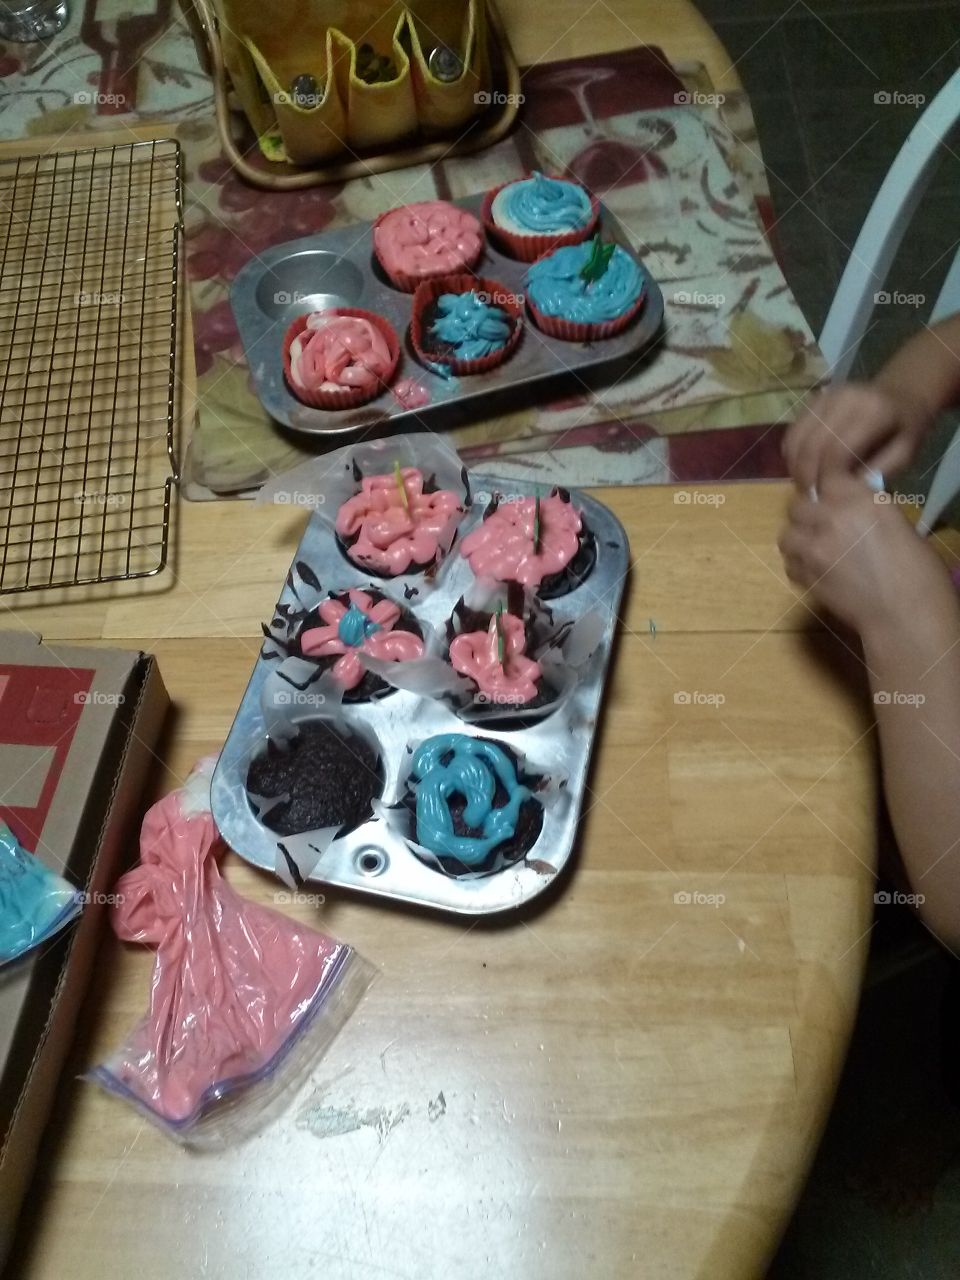 Decorating the cupcakes w my daughter